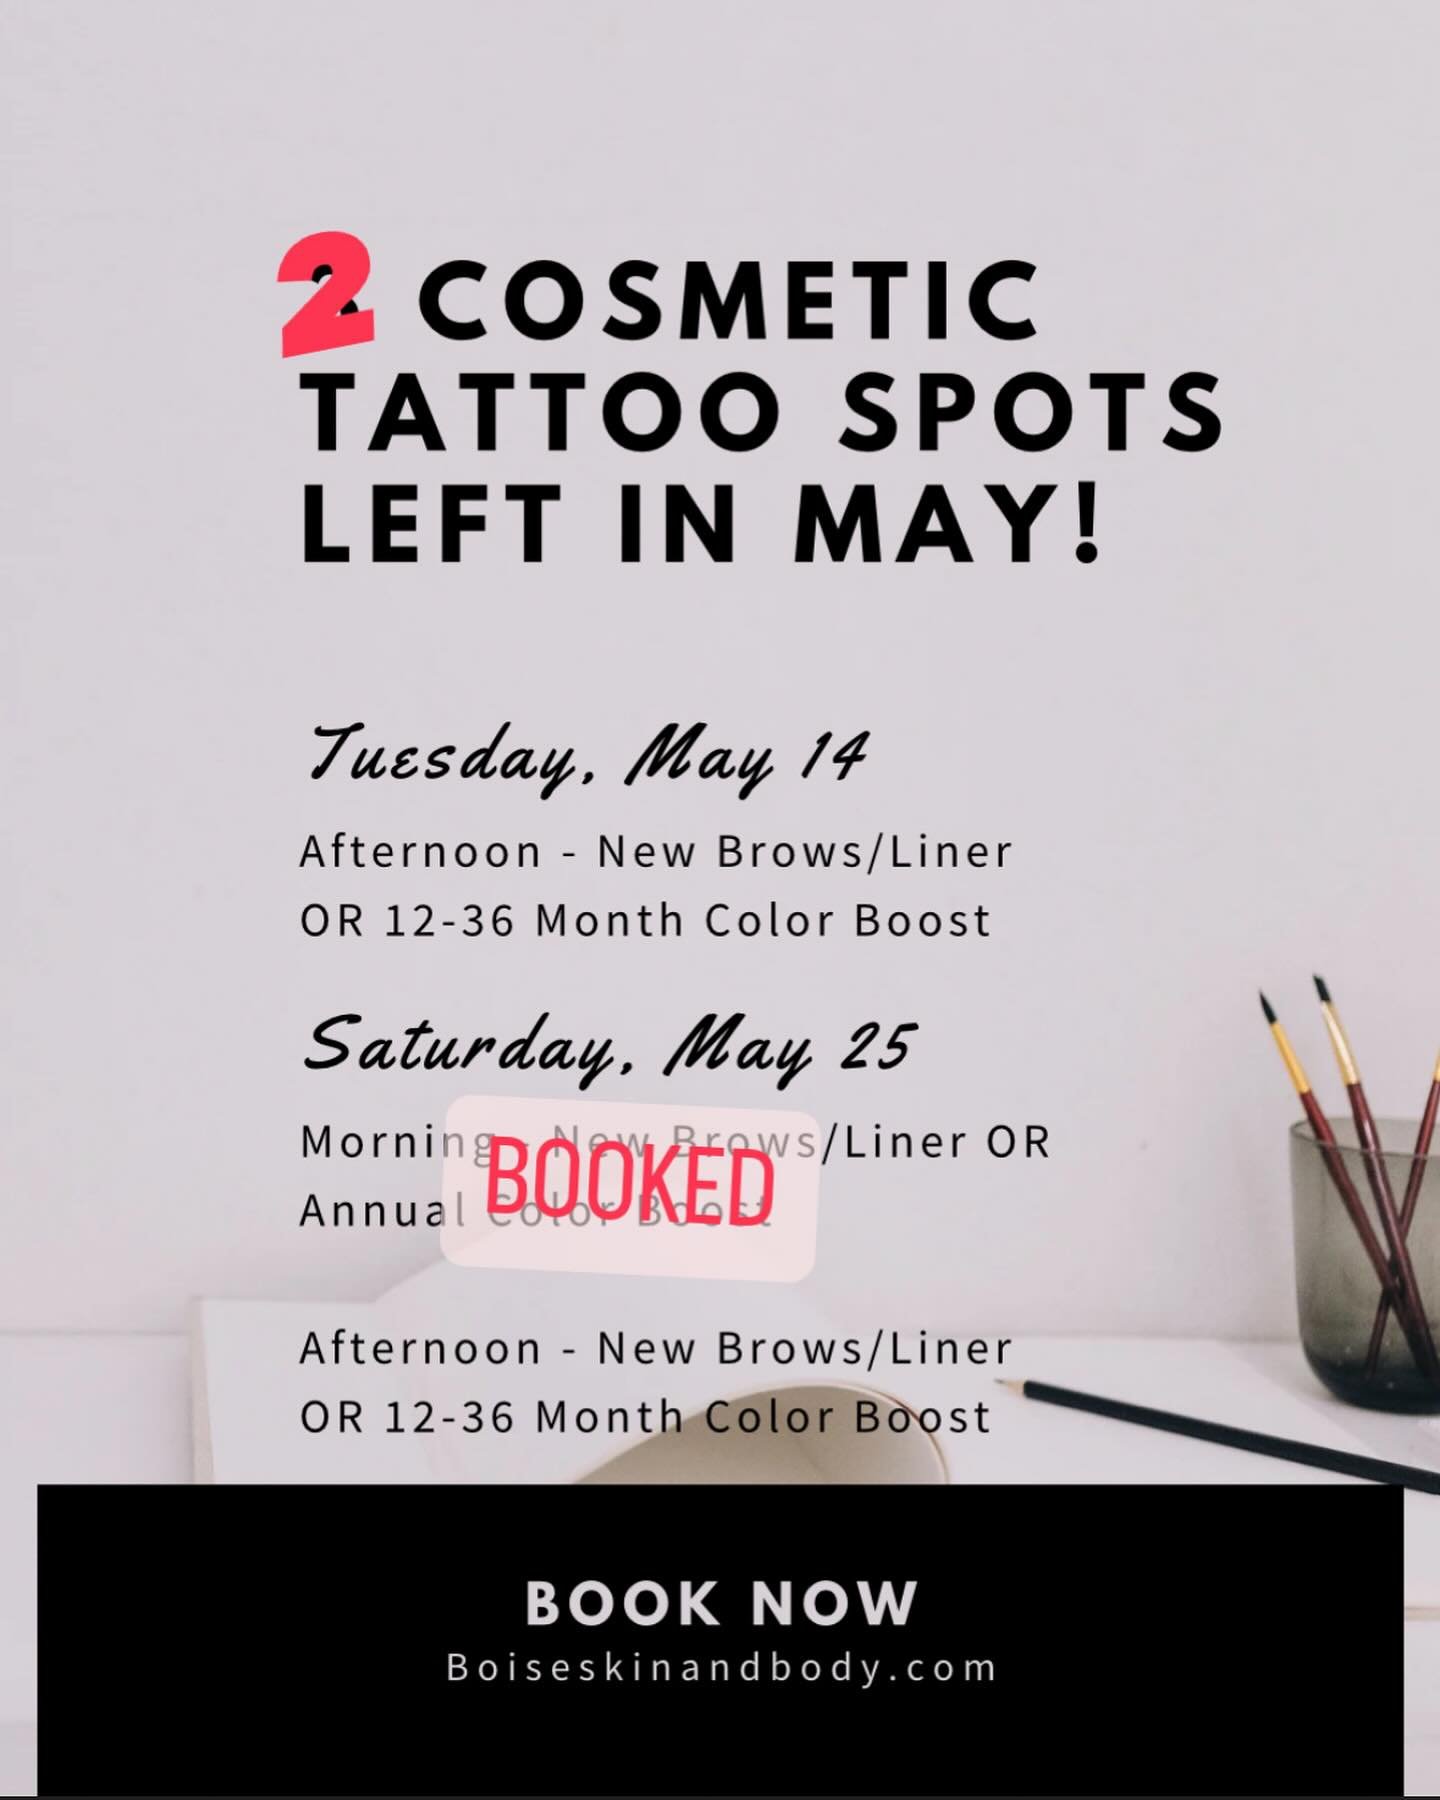 One down, 2 left! These are the LAST 2 permanent makeup slots left in May! I&rsquo;d love to see a new client or any of my lovely ladies in need of a maintenance appointment. 

Comment or DM for a DEEP discount on one of these time slots 💕. 

Boise 